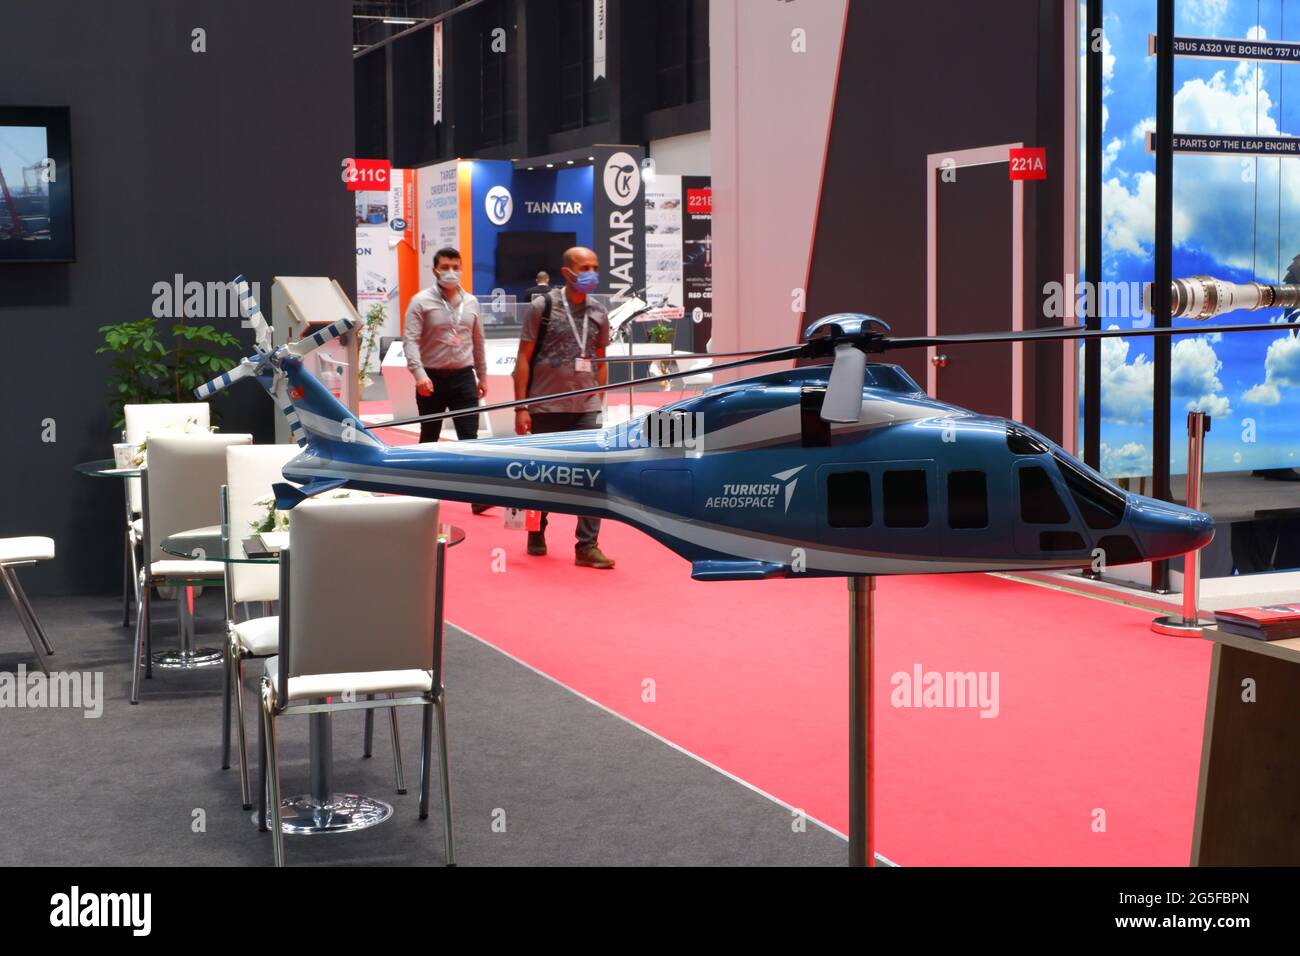 Model of a Turkish designed helicopter 'Gokbey' at an industrial fair during Covid Restriction with visitors wearing masks Stock Photo